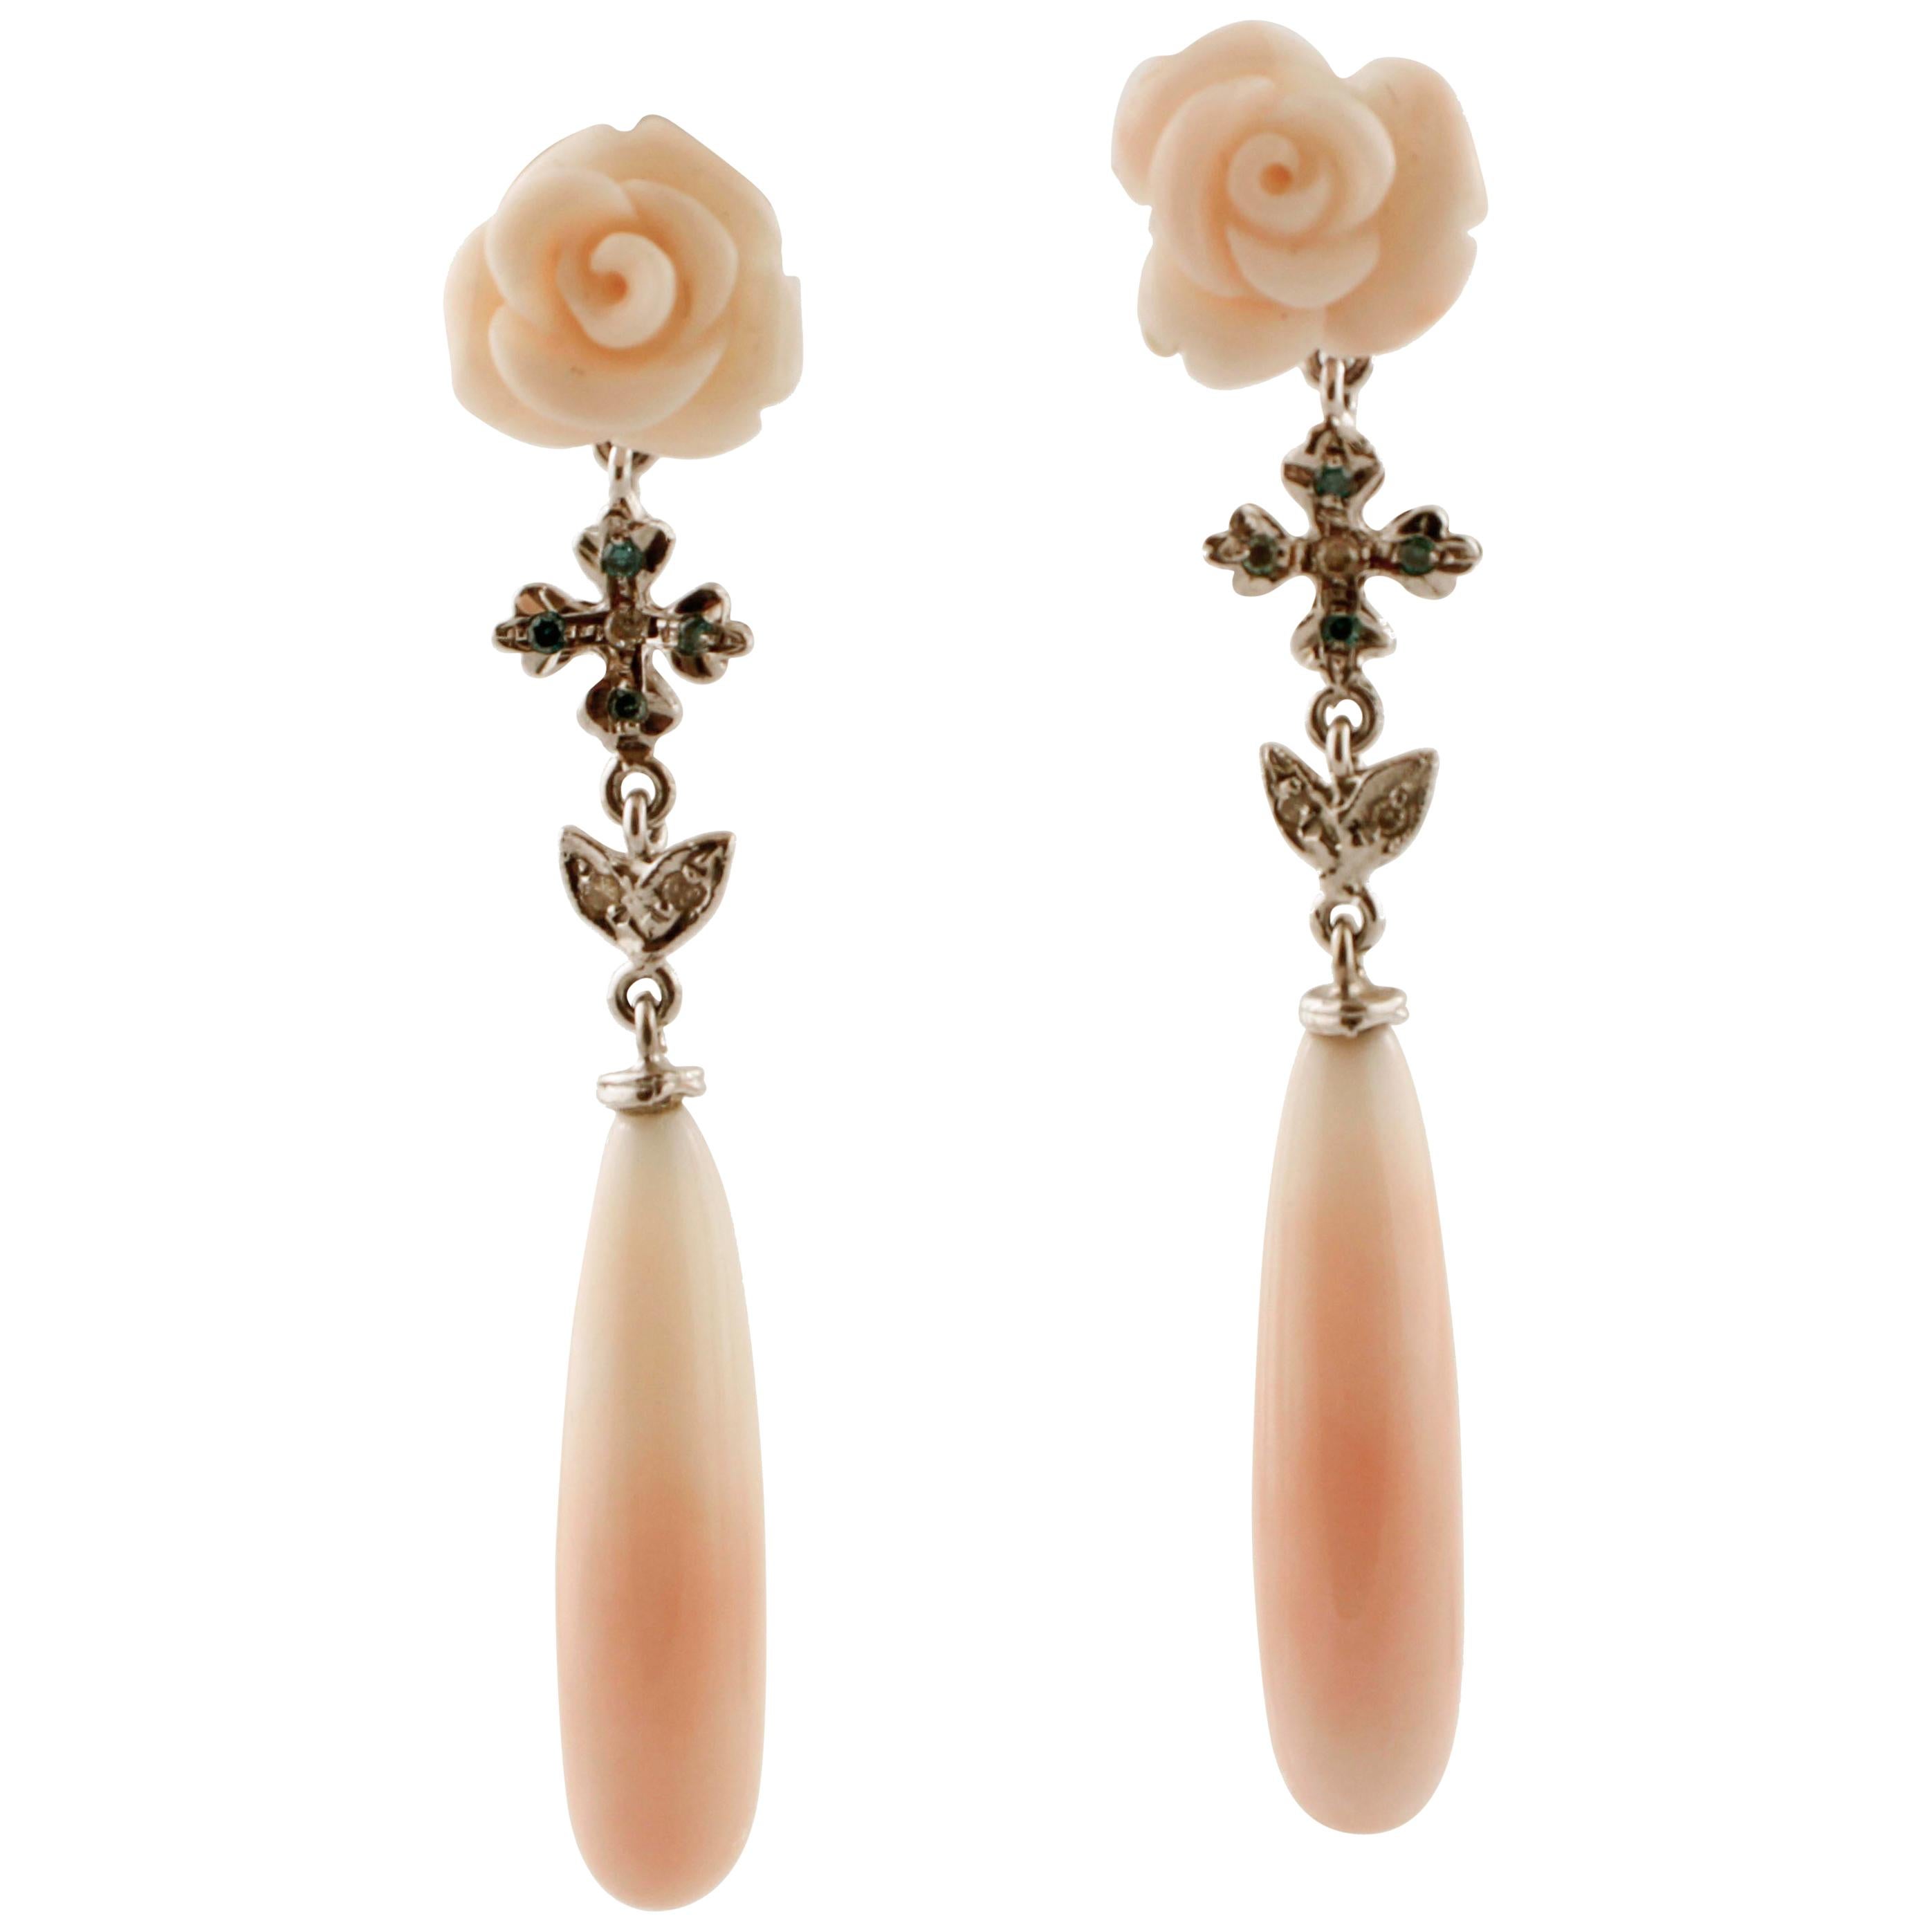 White and Blue Fancy Diamonds, Pink Flowers/Drops Coral, White Gold Drop Earrings